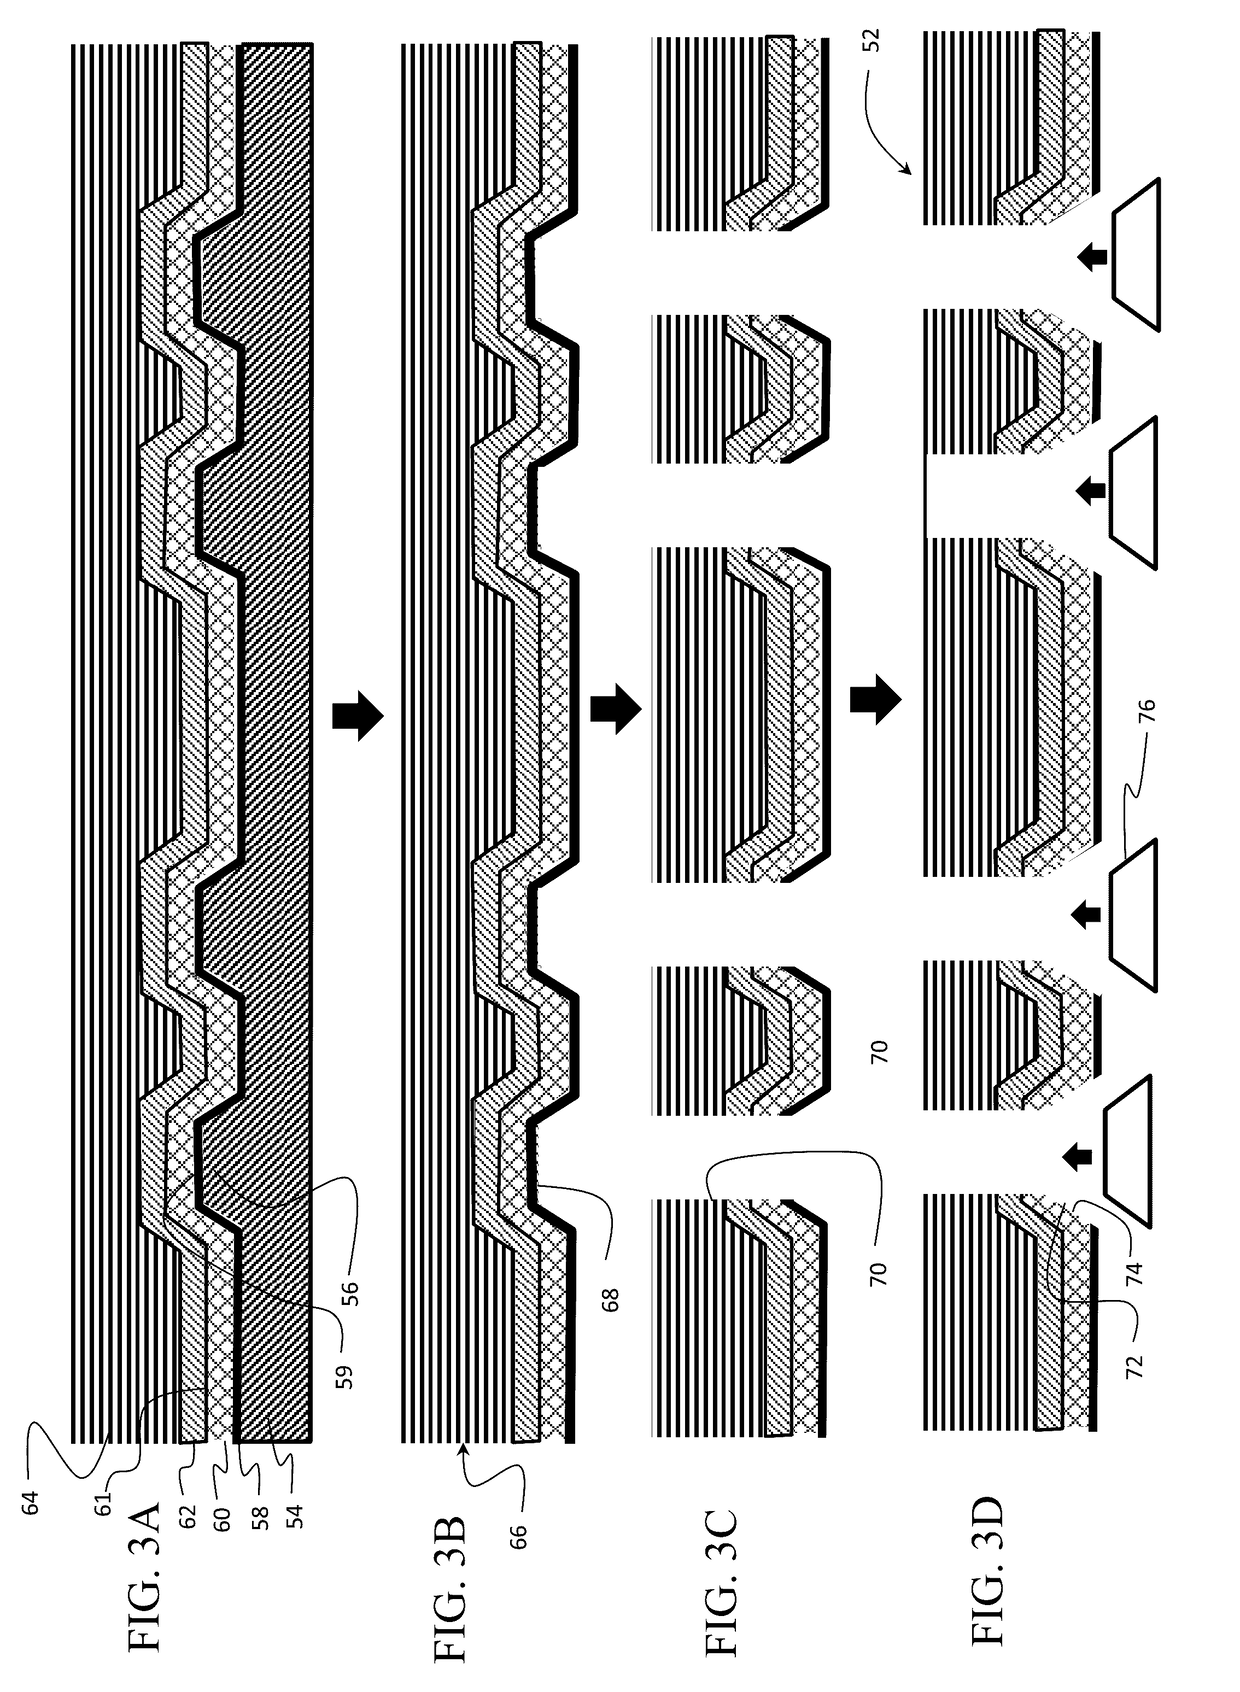 Methods for diverting lightning current from skin fasteners in composite, non-metallic structures